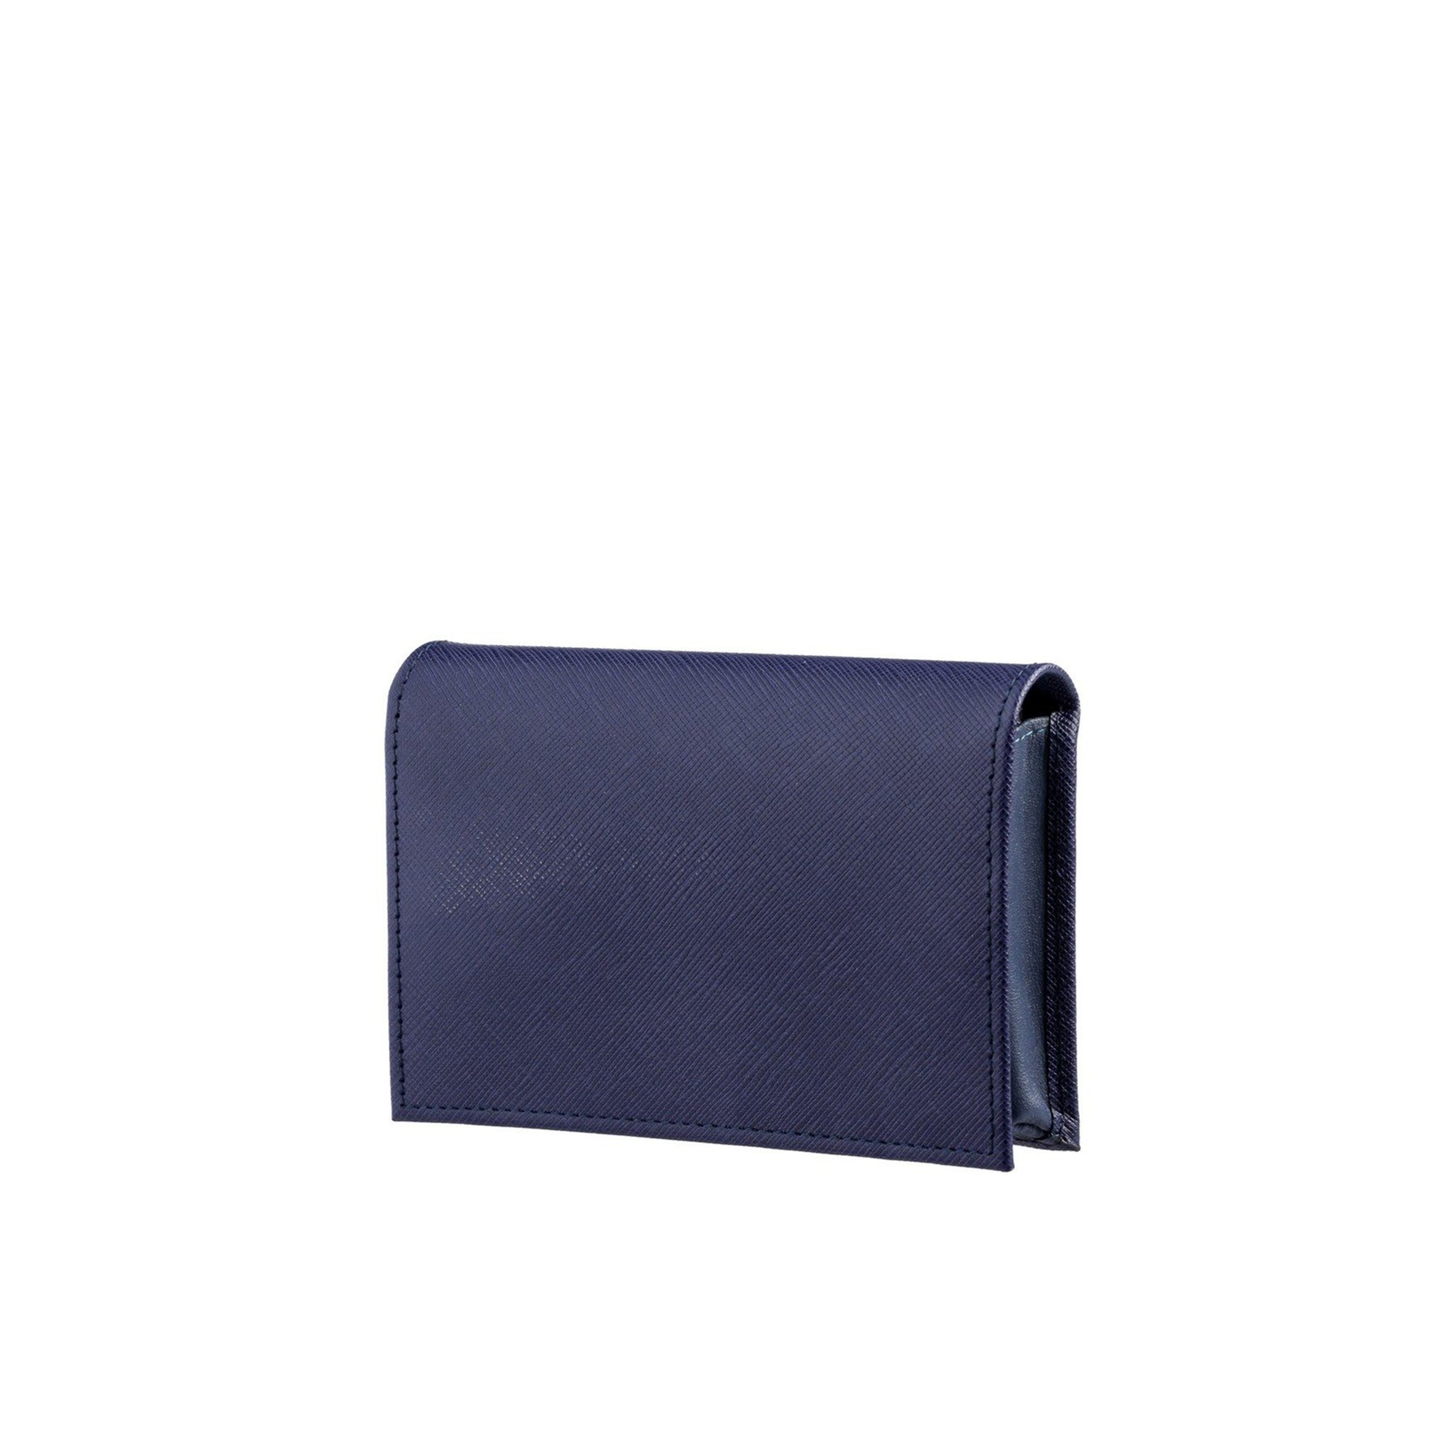 Small Wallet in Blue Textured Leather